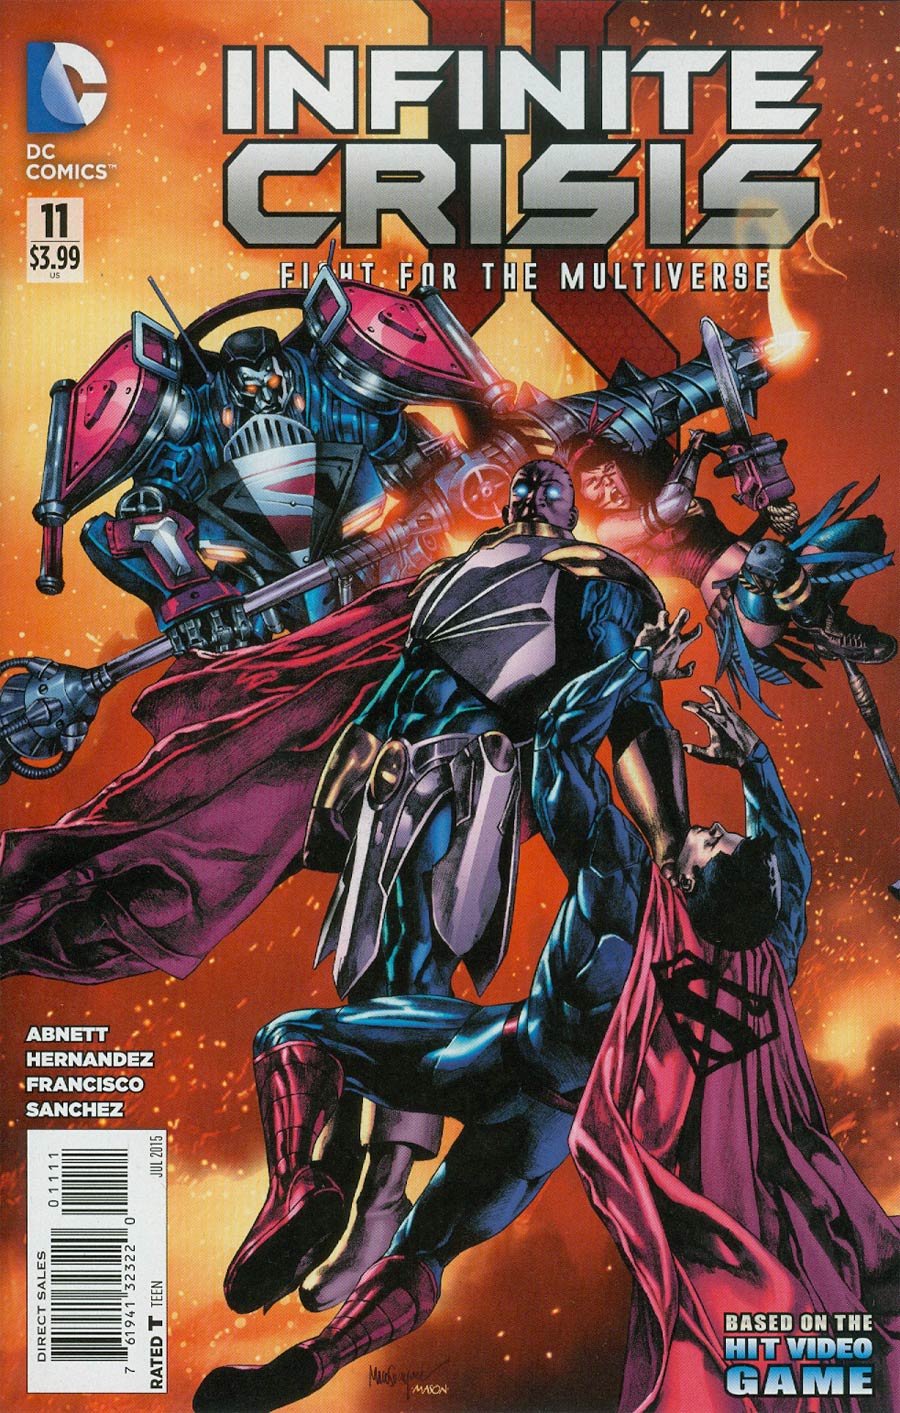 Infinite Crisis Fight For The Multiverse #11